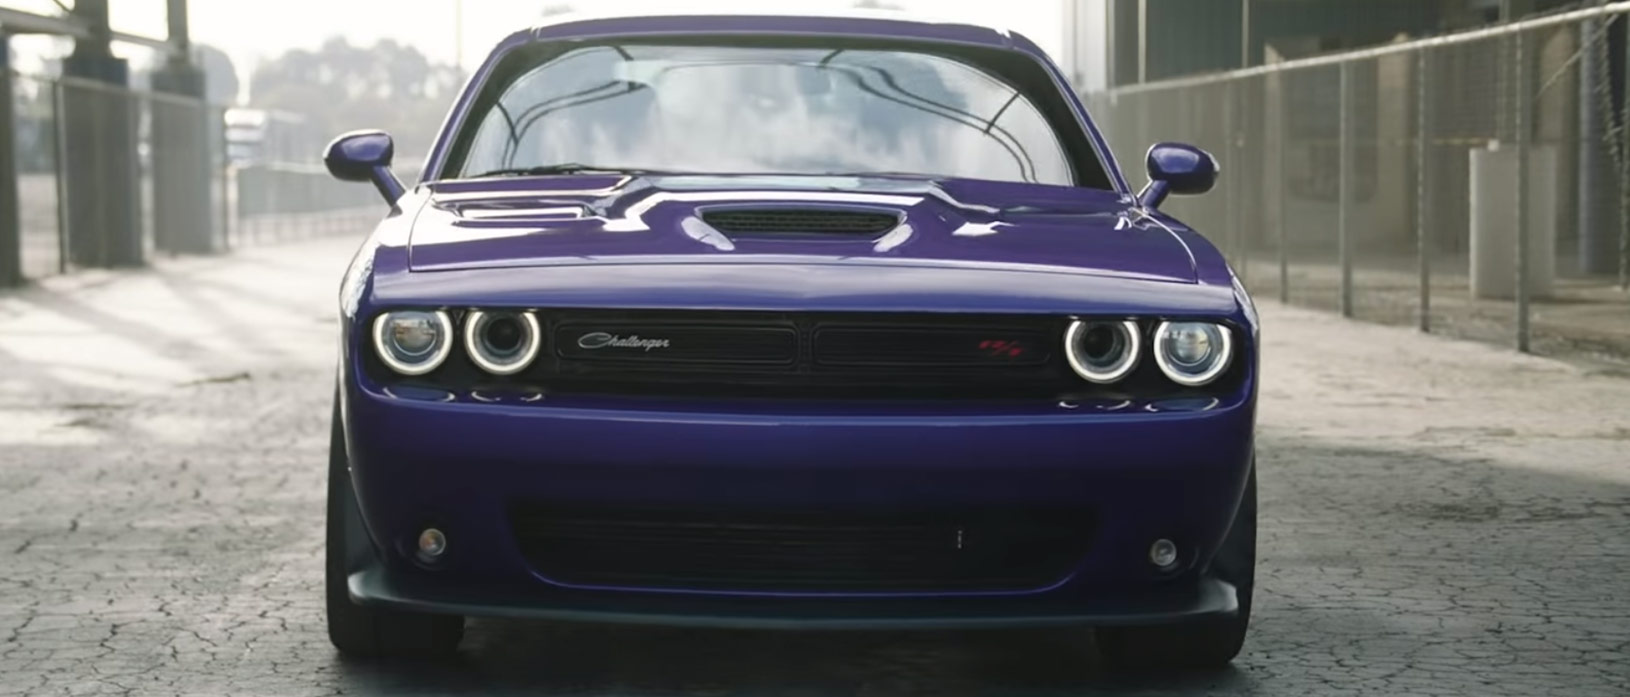 Launching The 2019 Dodge Challenger R/T Scat Pack 1320